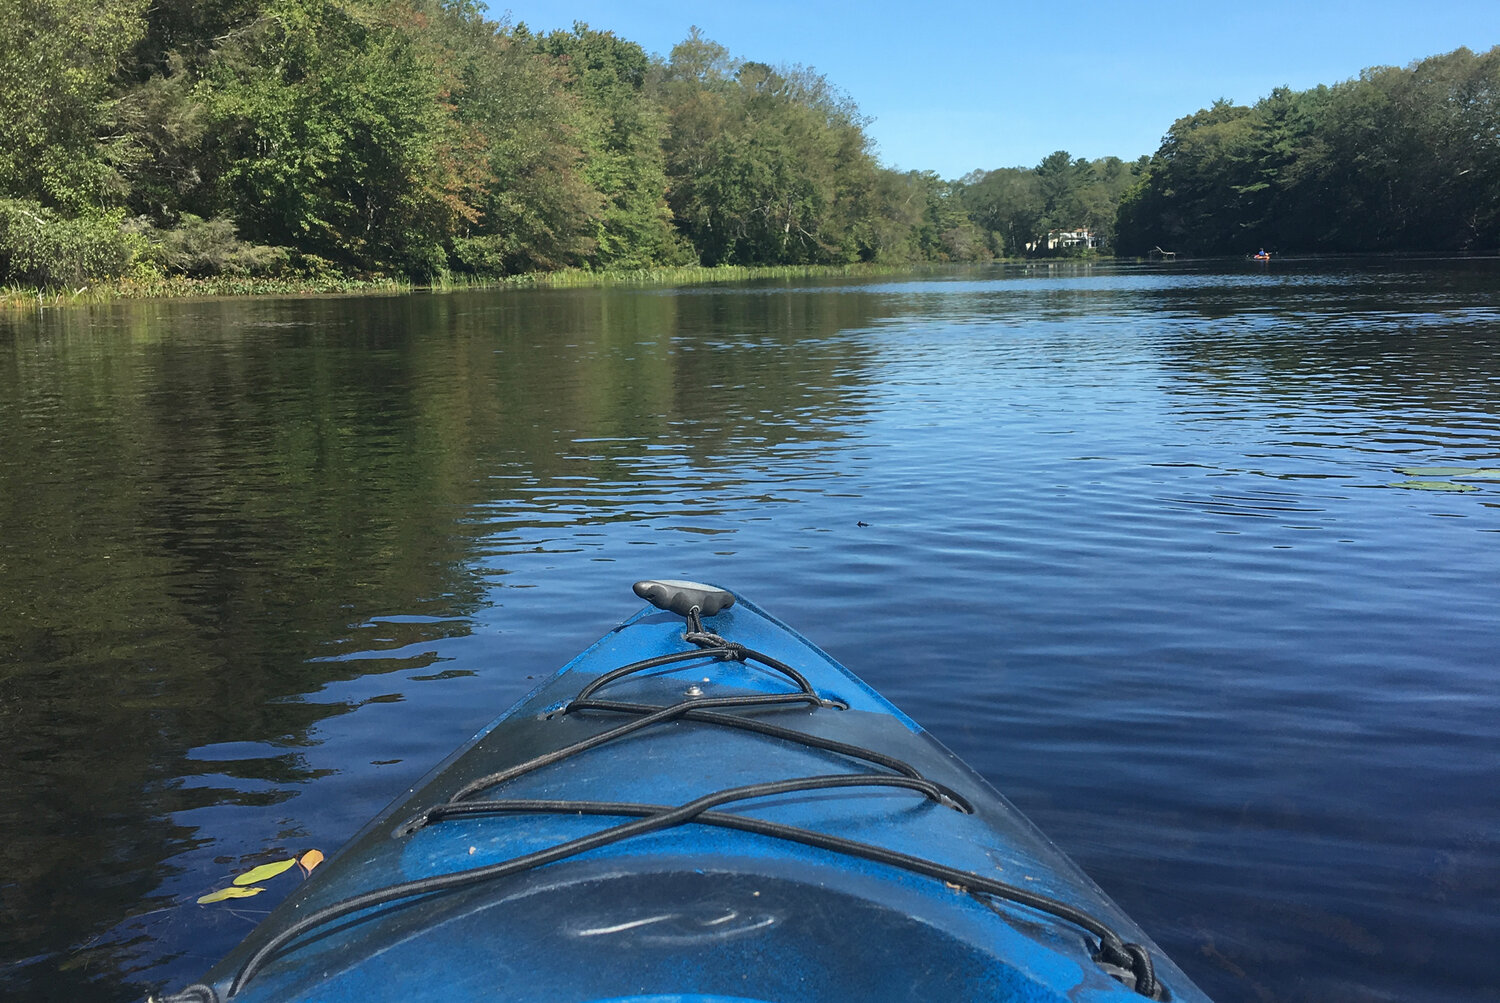 A serene paddle experience along Queen's River